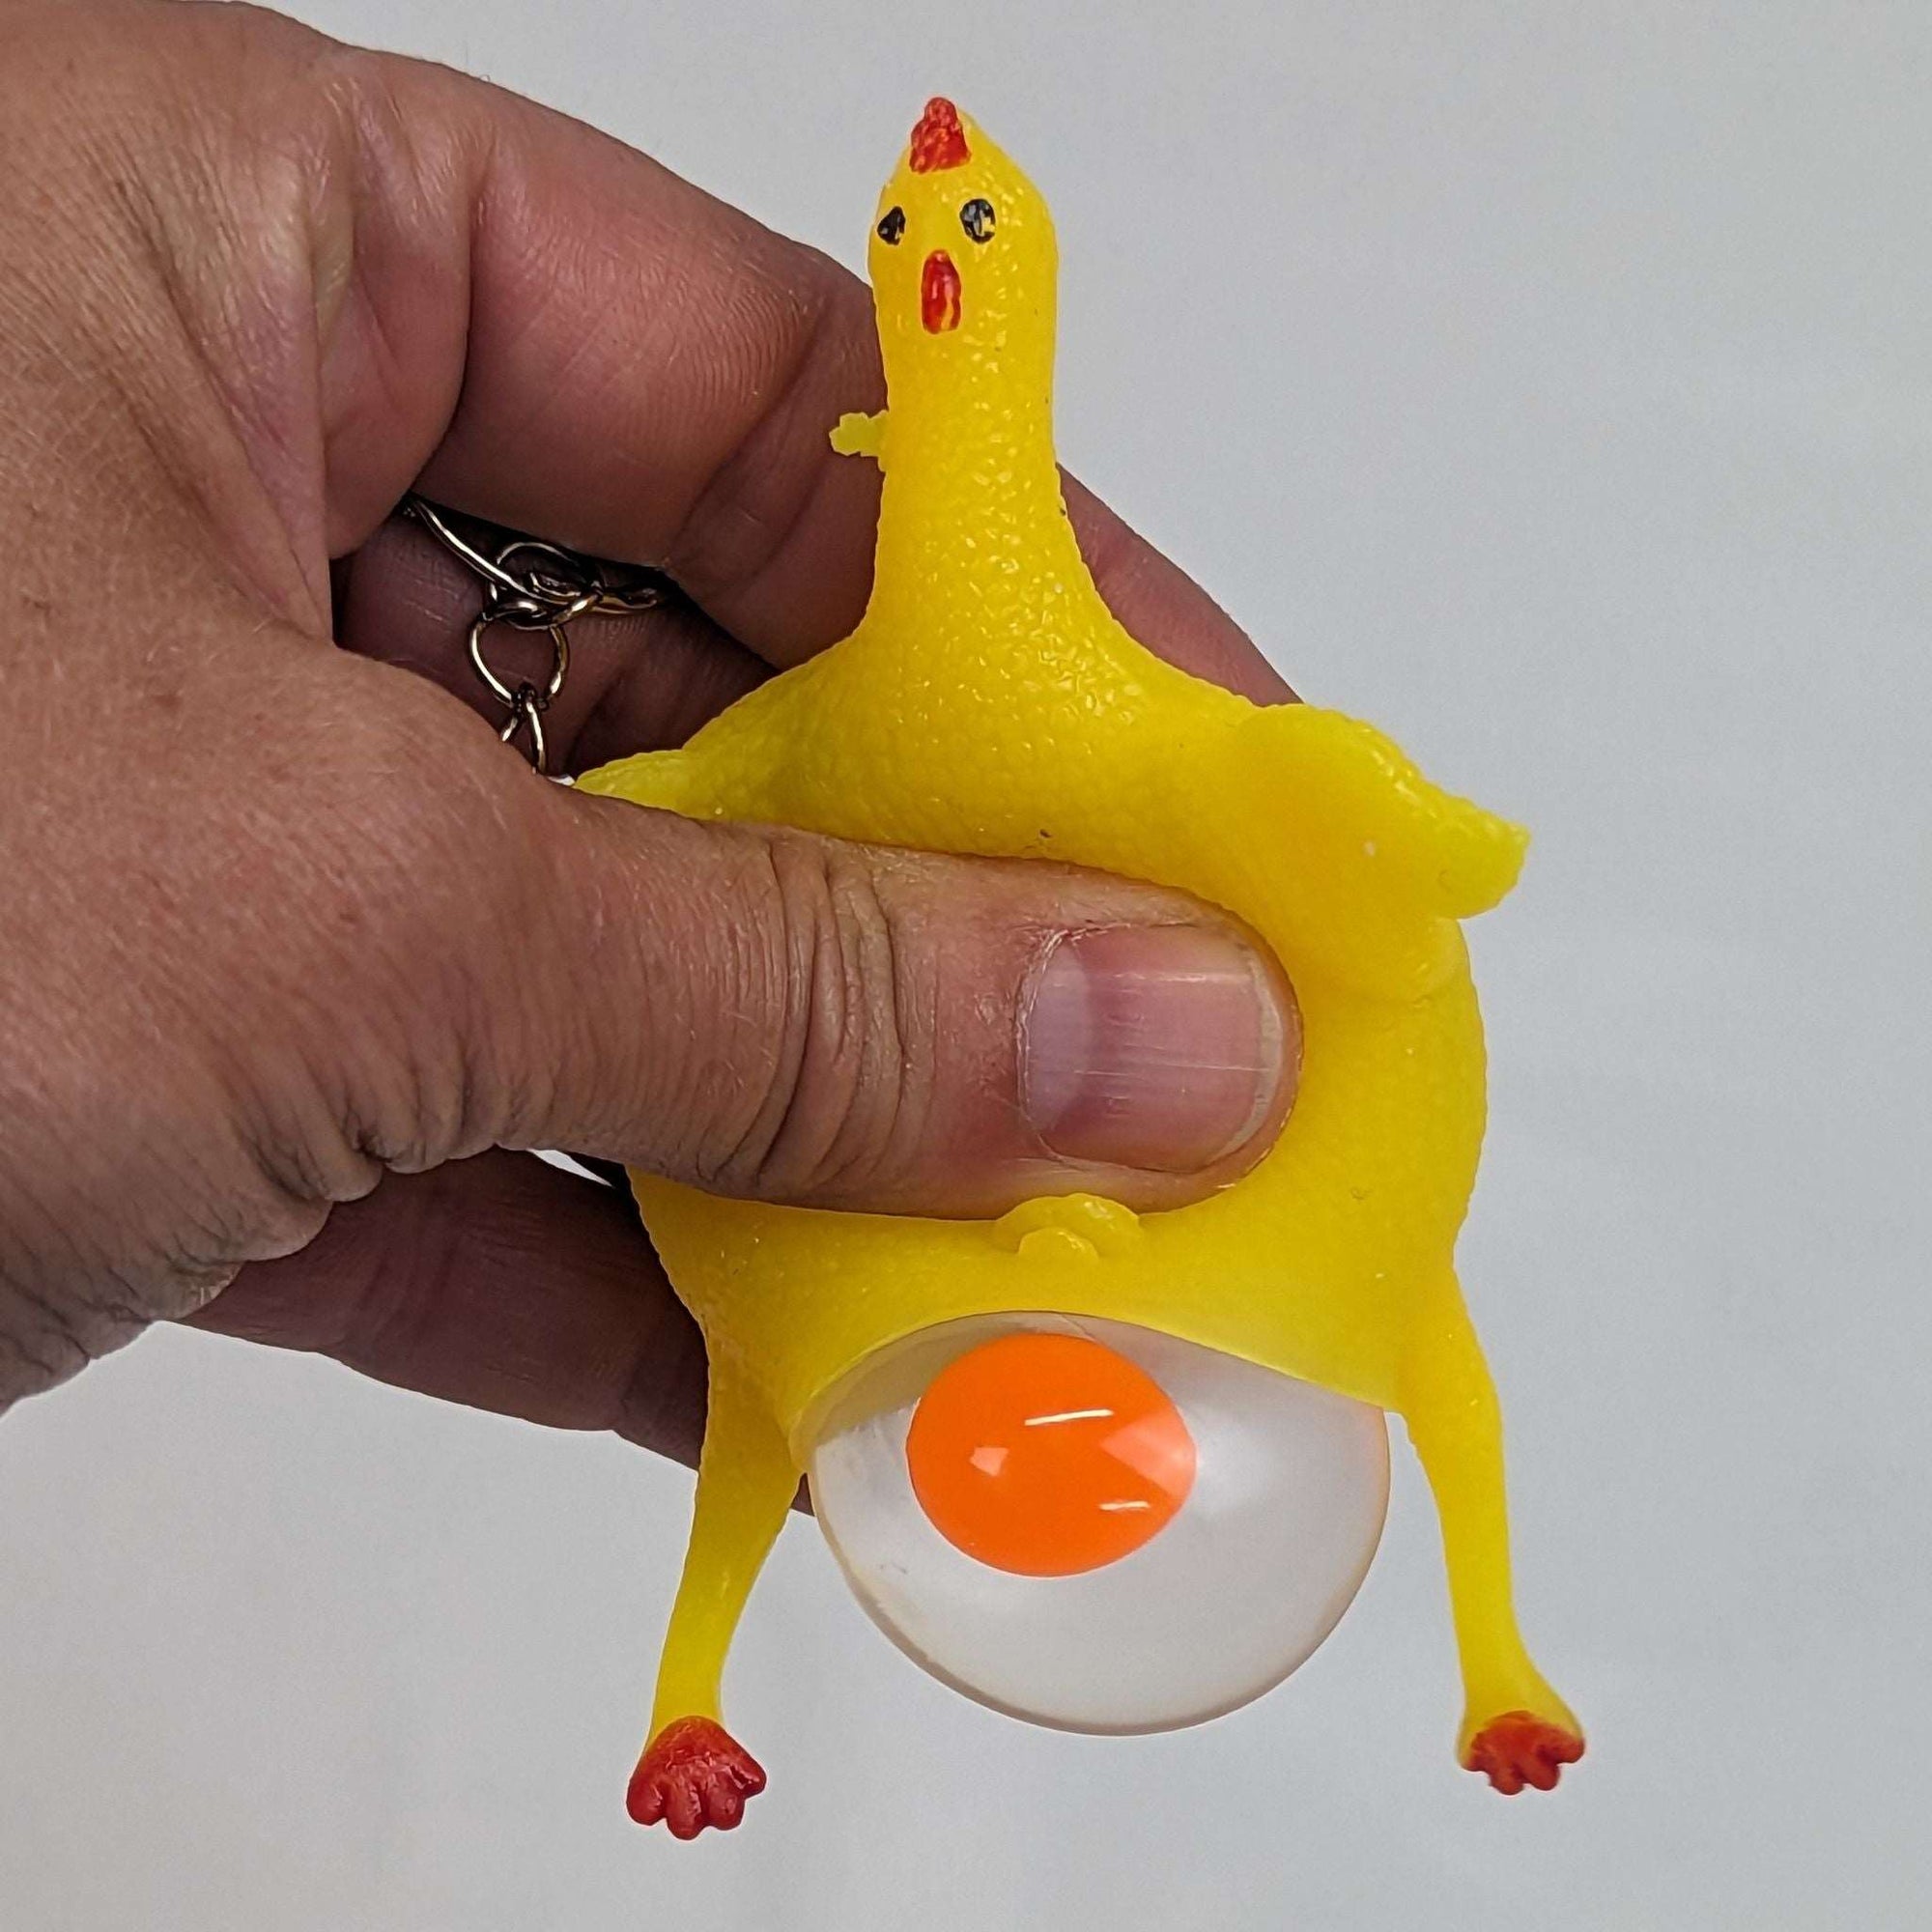 Cluck n' Squeeze Stress Ball Keychain